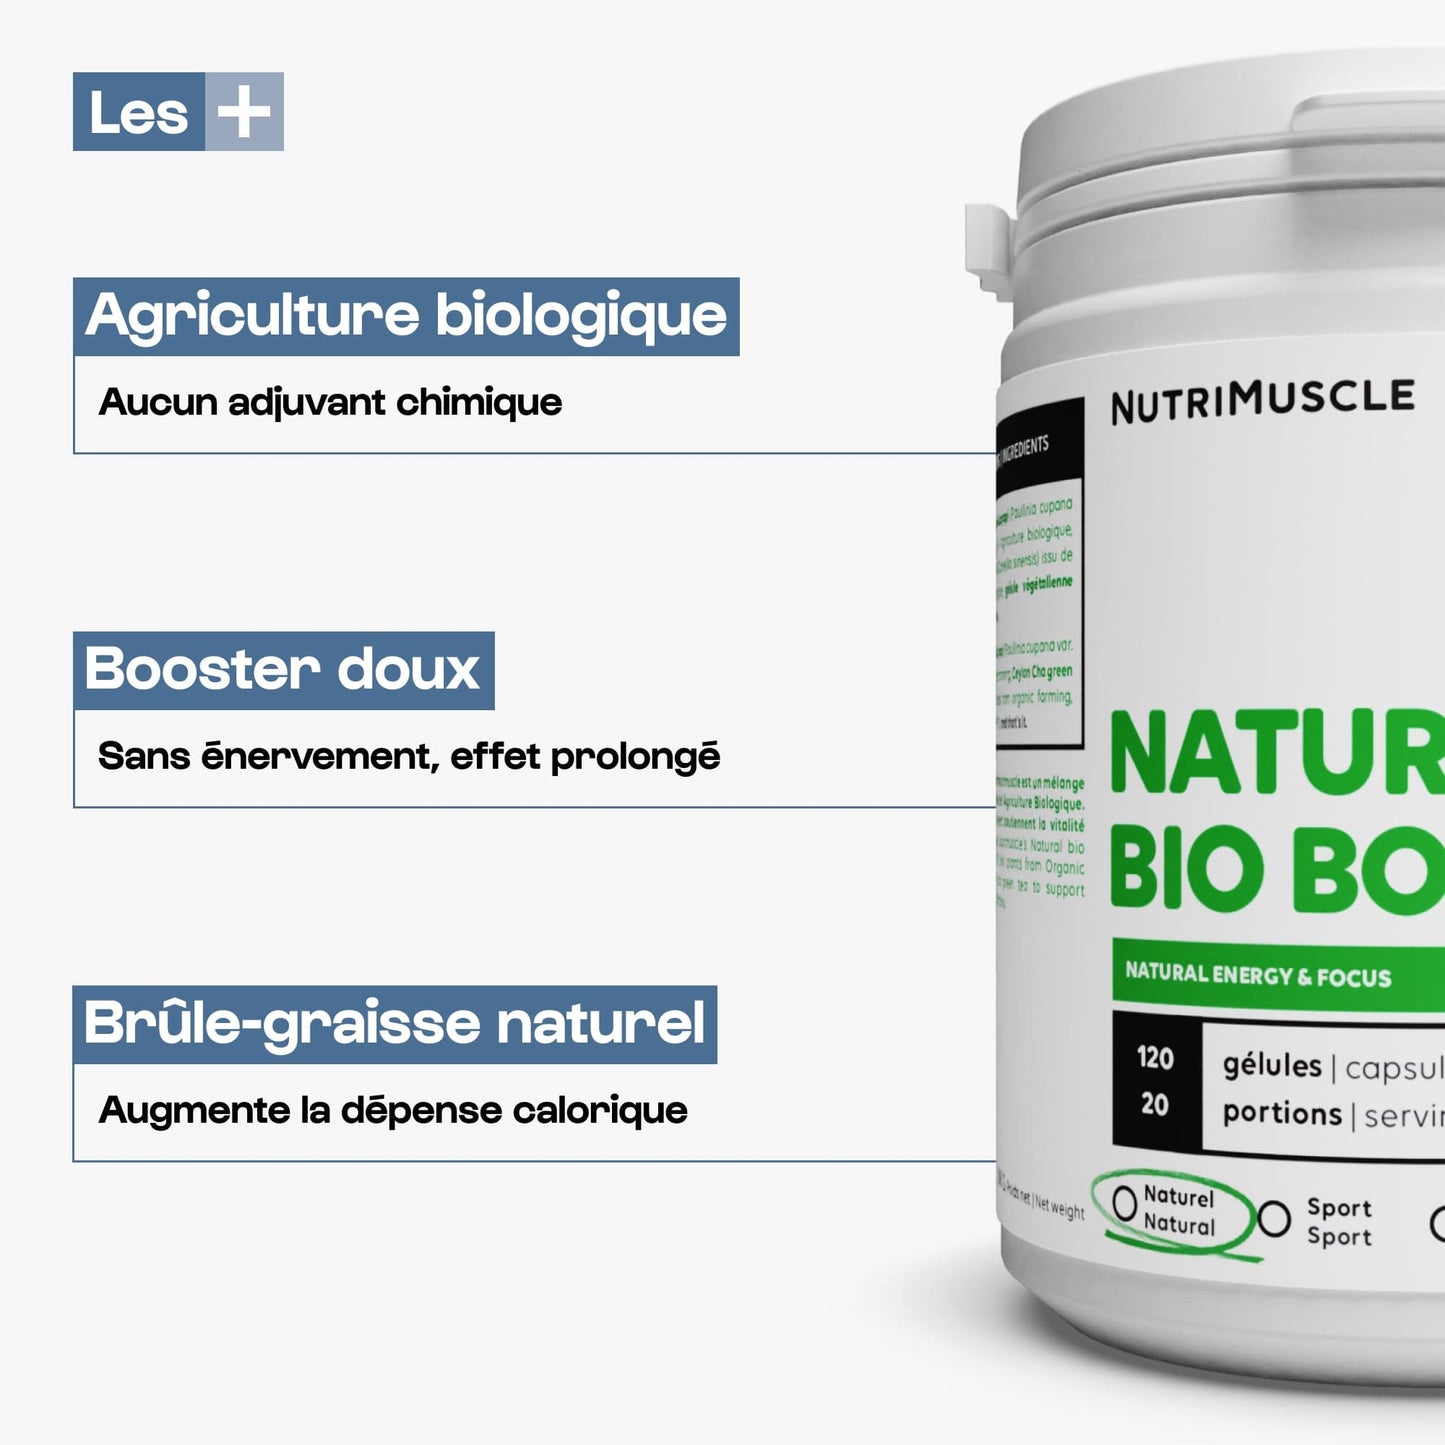 Nutrimuscle Plantes Natural Bio Booster